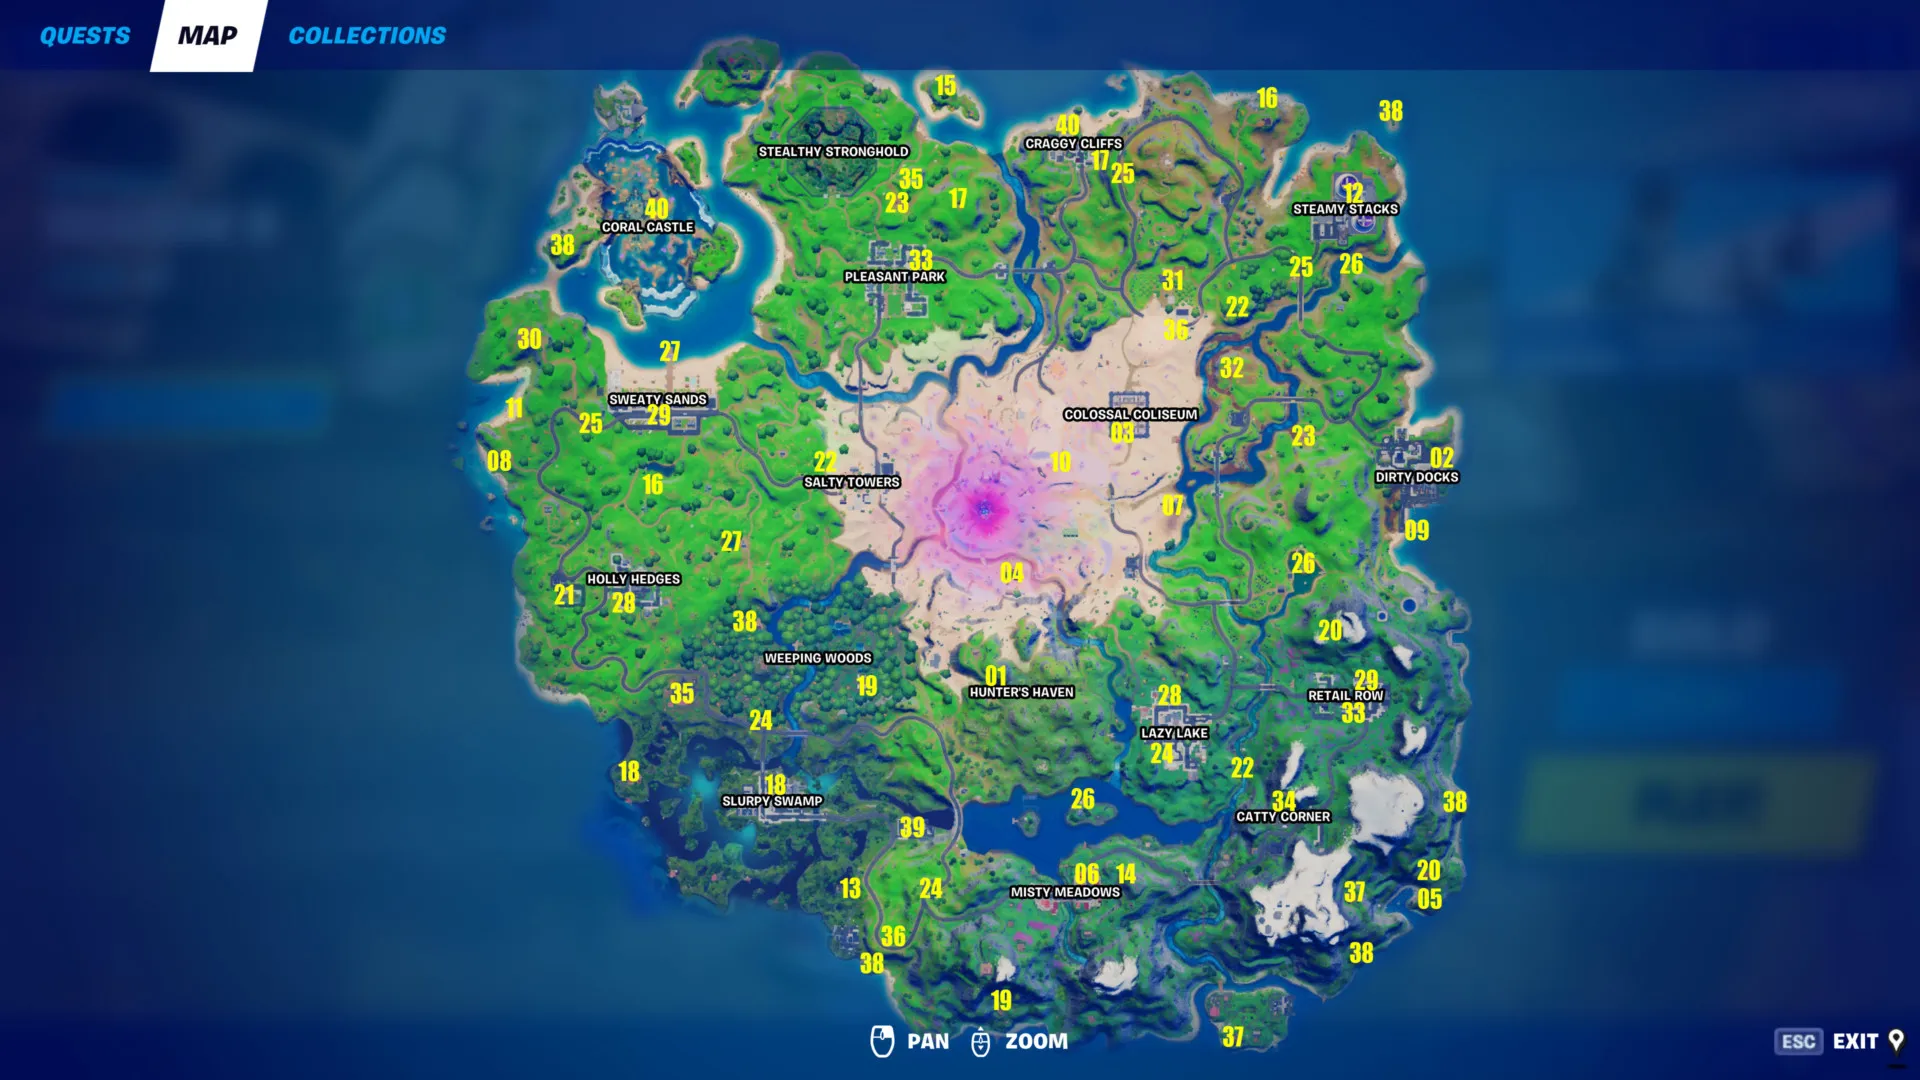 Fortnite Guide All Npc Character Locations The Quests They Each Offer